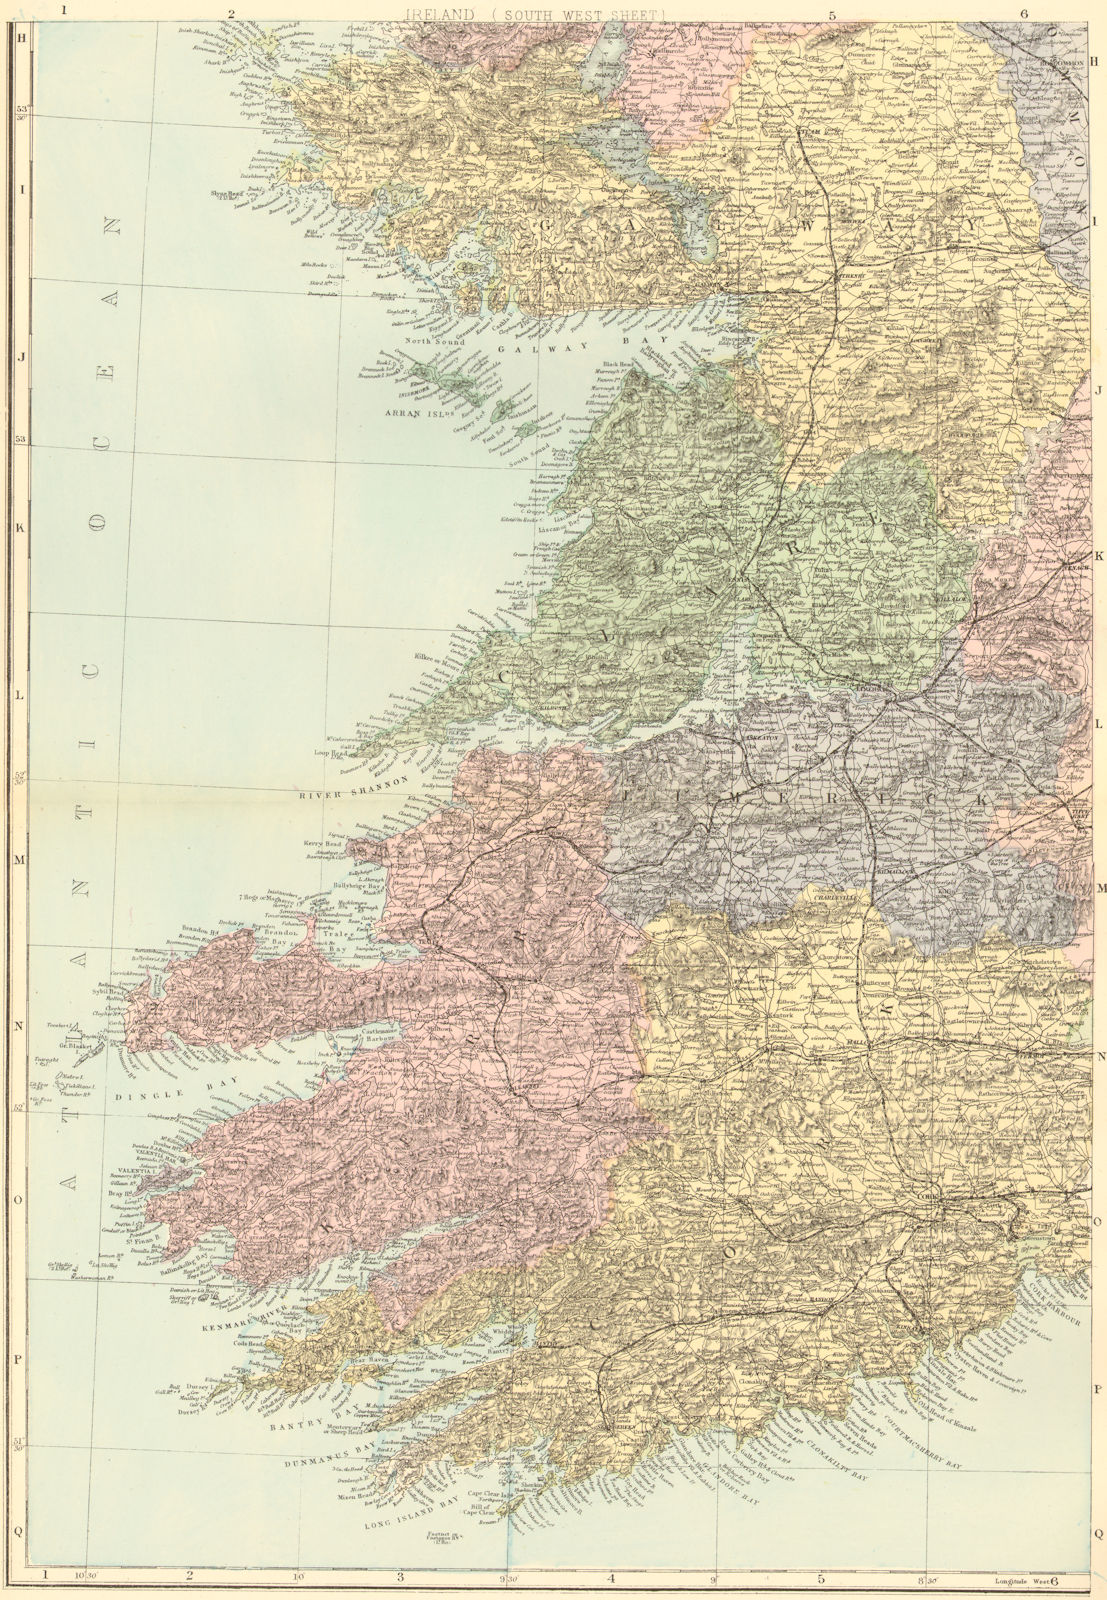 Associate Product IRELAND (South West). Munster. Cork Kerry Clare Limerick. GW BACON 1884 map